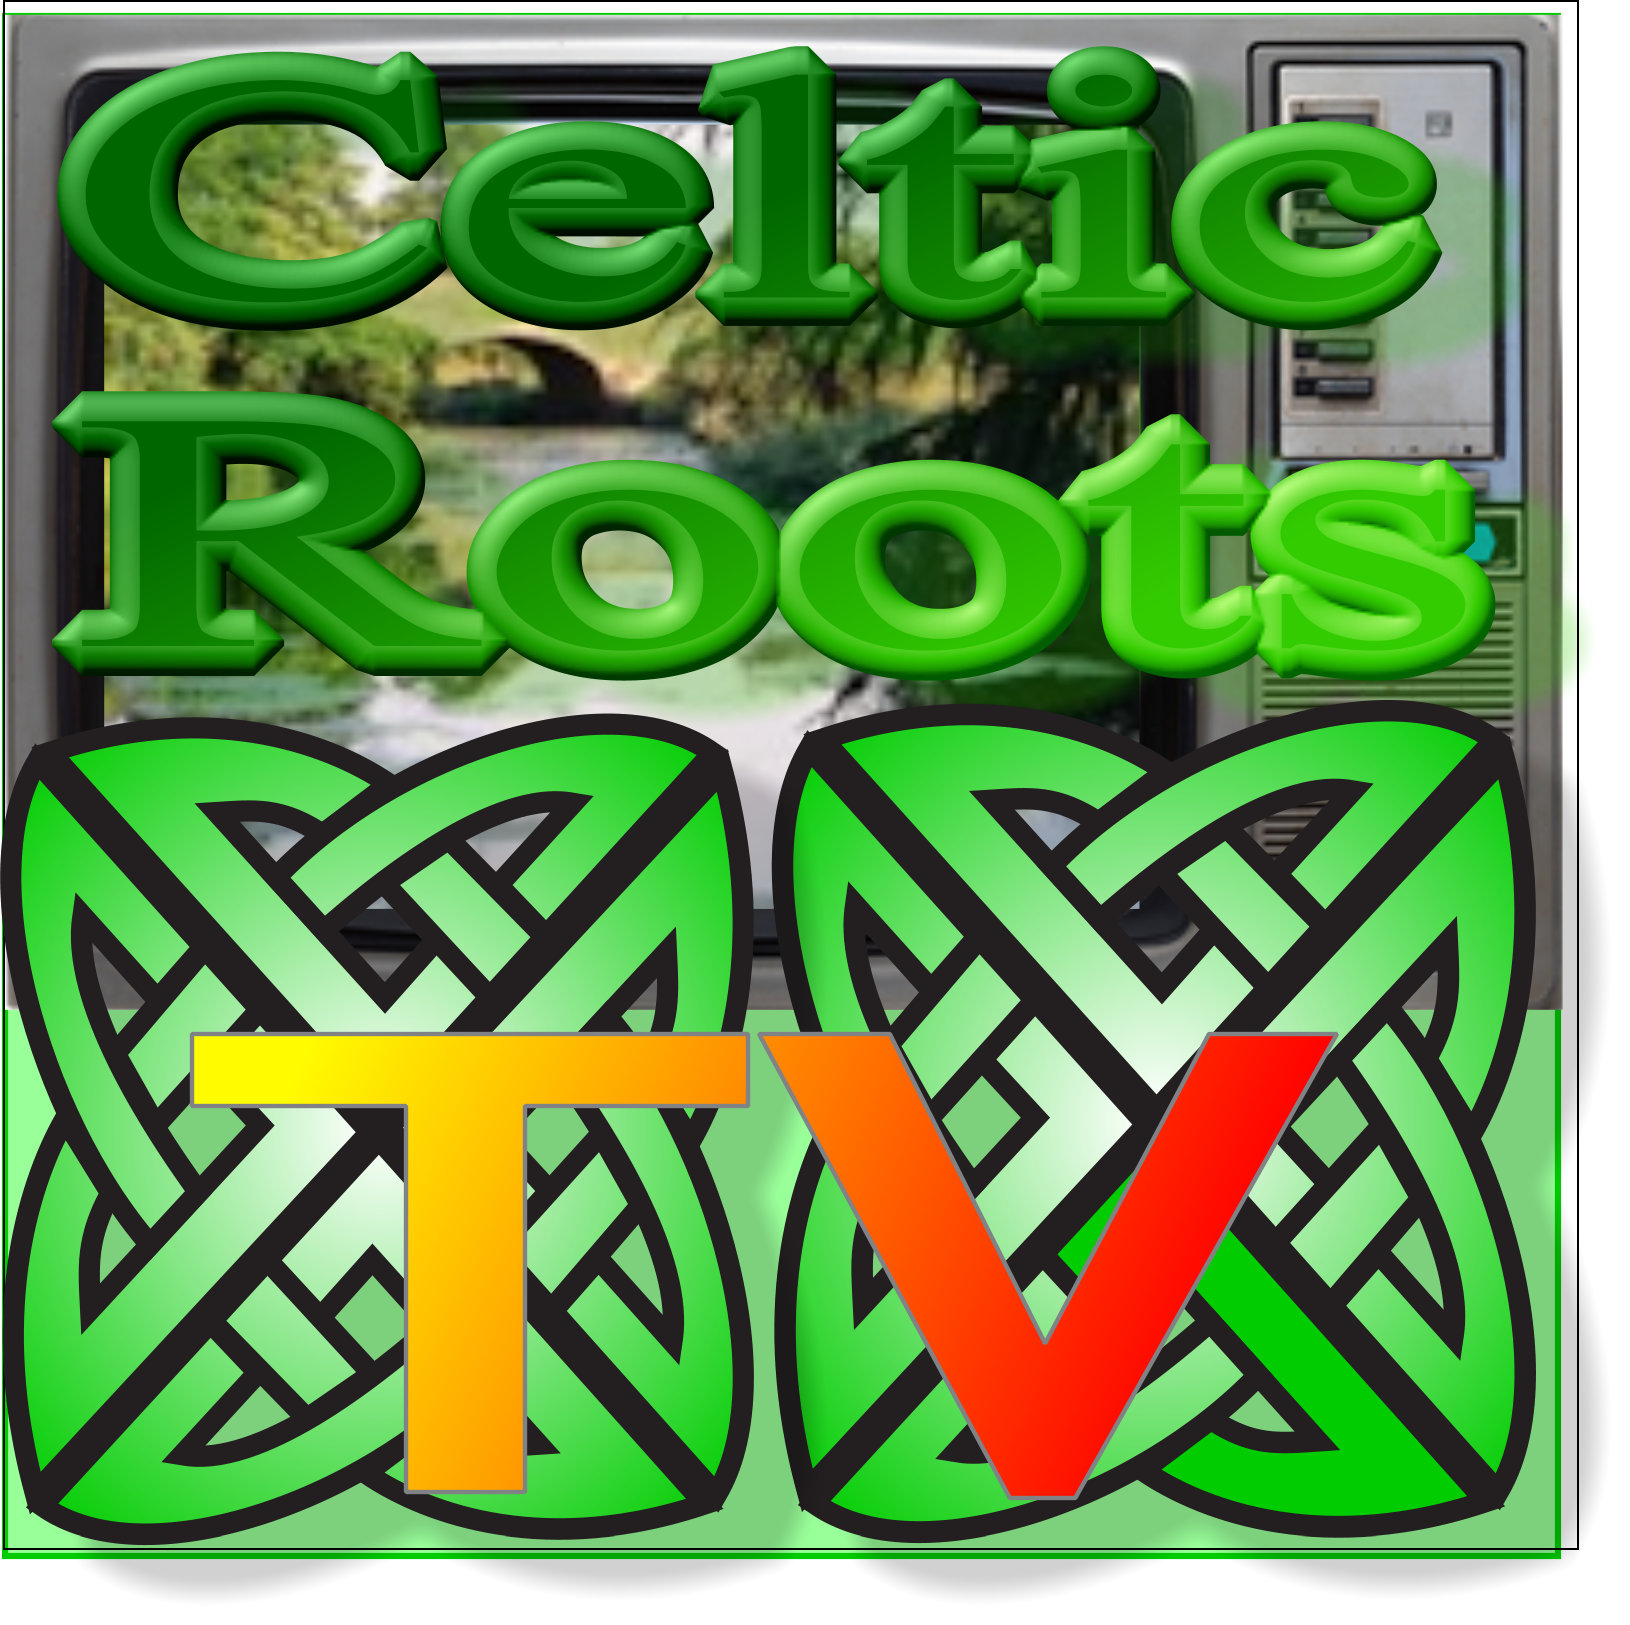 Celtic Roots Radio – Online Submissions via Sonicbids